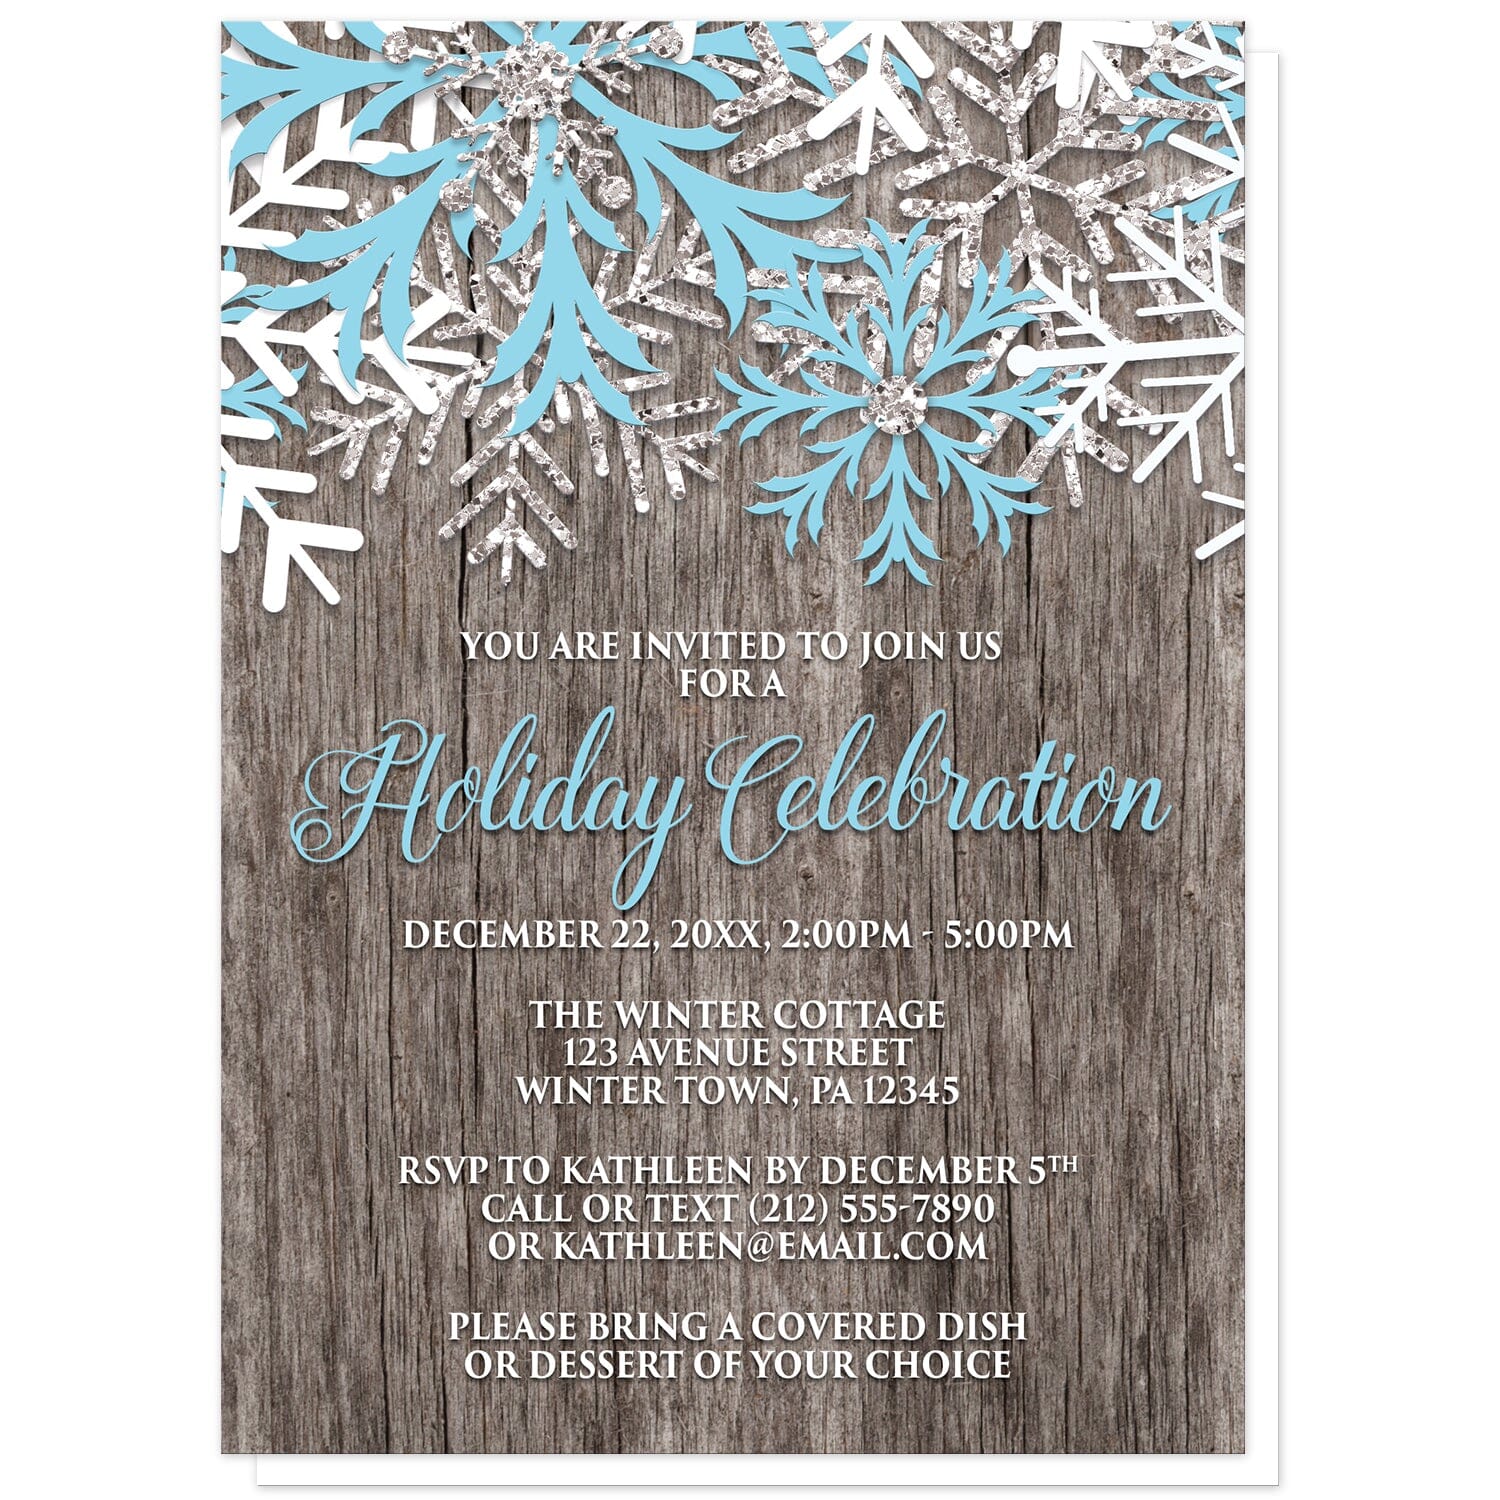 Rustic Winter Wood Blue Snowflake Holiday Invitations at Artistically Invited. Country-inspired rustic winter wood blue snowflake holiday invitations designed with light blue, white, and silver-colored glitter-illustrated snowflakes along the top over a rustic wood pattern illustration. Your personalized holiday party details are custom printed in light blue and white over the wood background below the snowflakes.